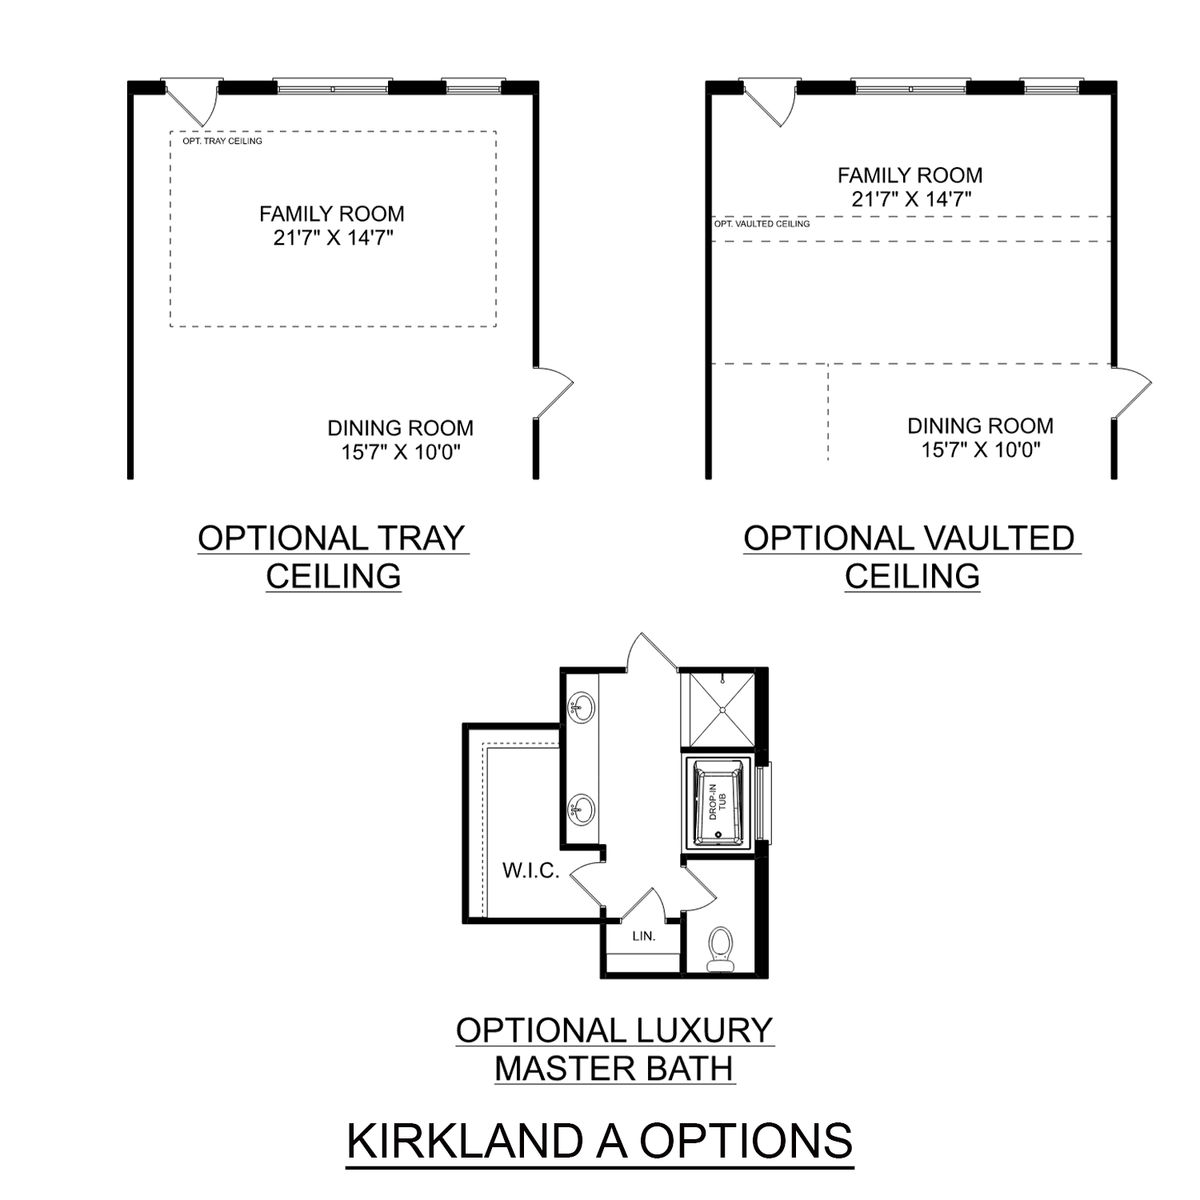 2 - The Kirkland floor plan layout for 217 White Horse Way in Davidson Homes' Kendall Downs community.